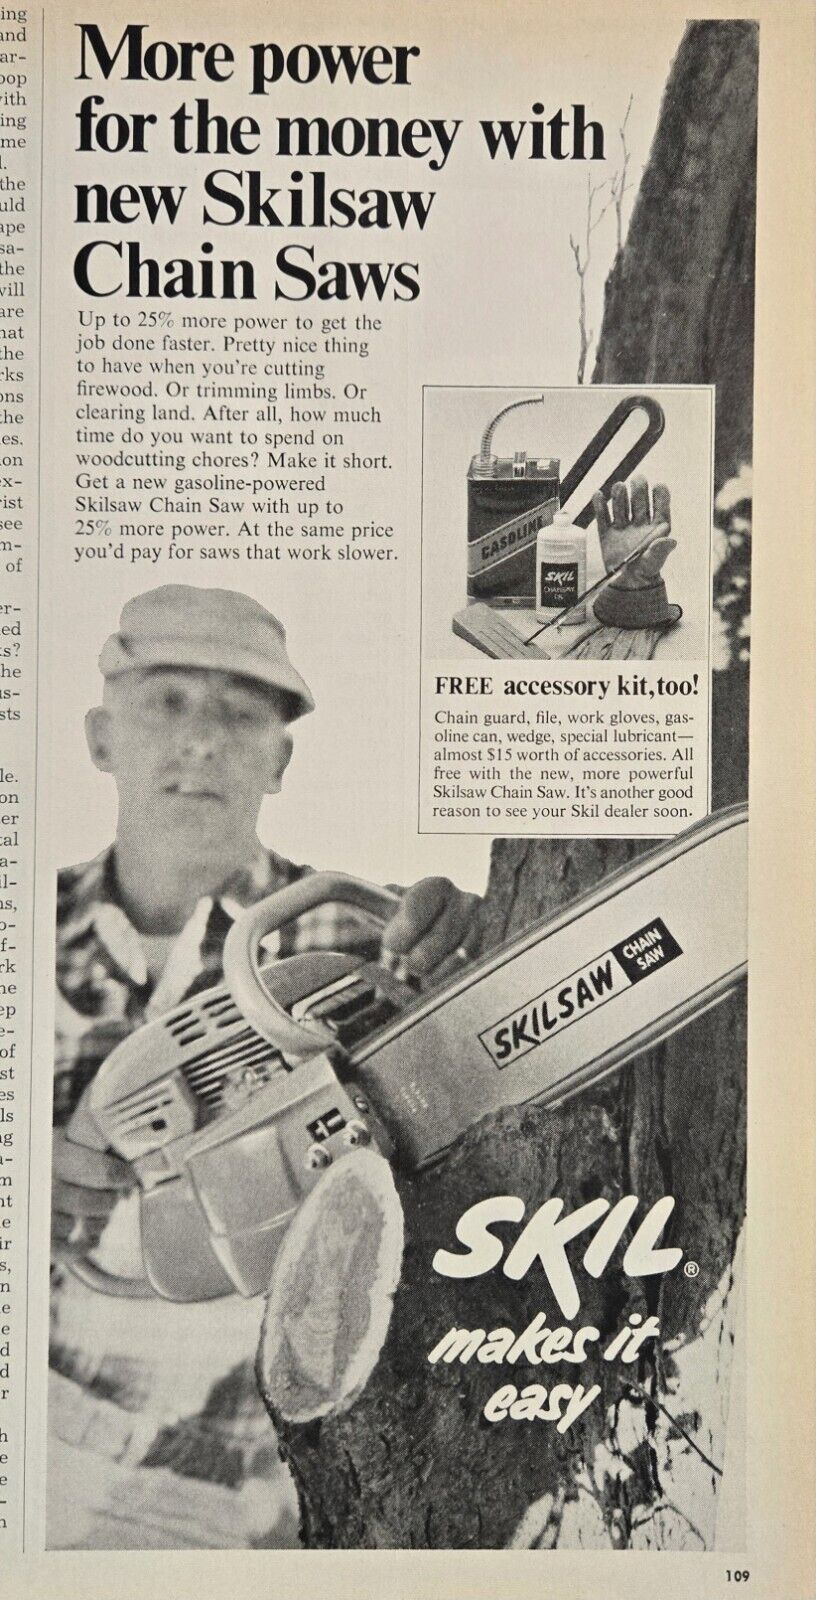 1969 VINTAGE PRINT AD - SKIL - SKILSAW CHAIN SAW AD - MORE POWER FOR THE MONEY